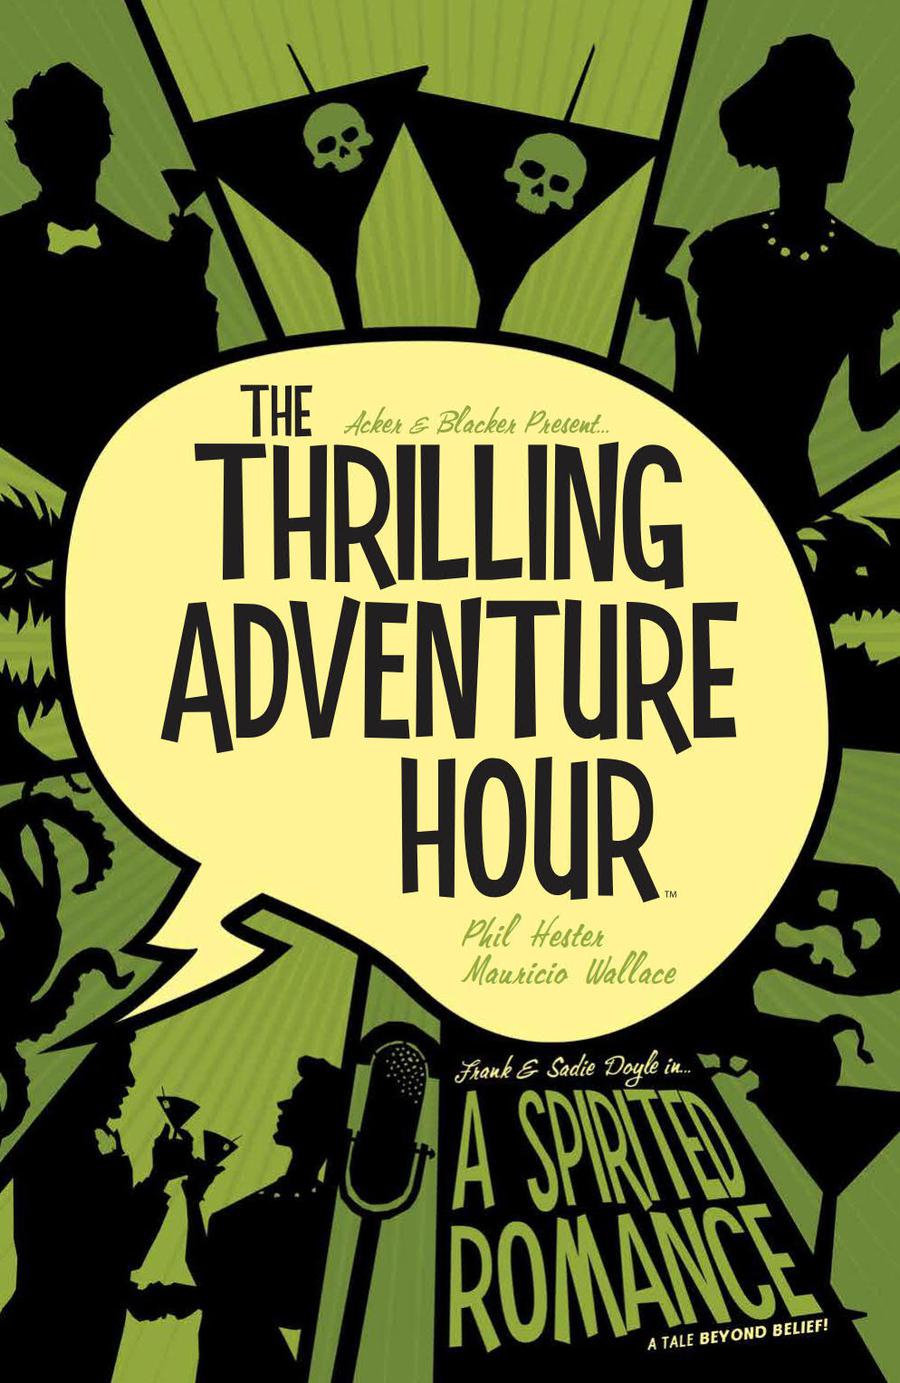 Thrilling Adventure Hour Vol 1 A Spirited Romance TP Discover Now Edition